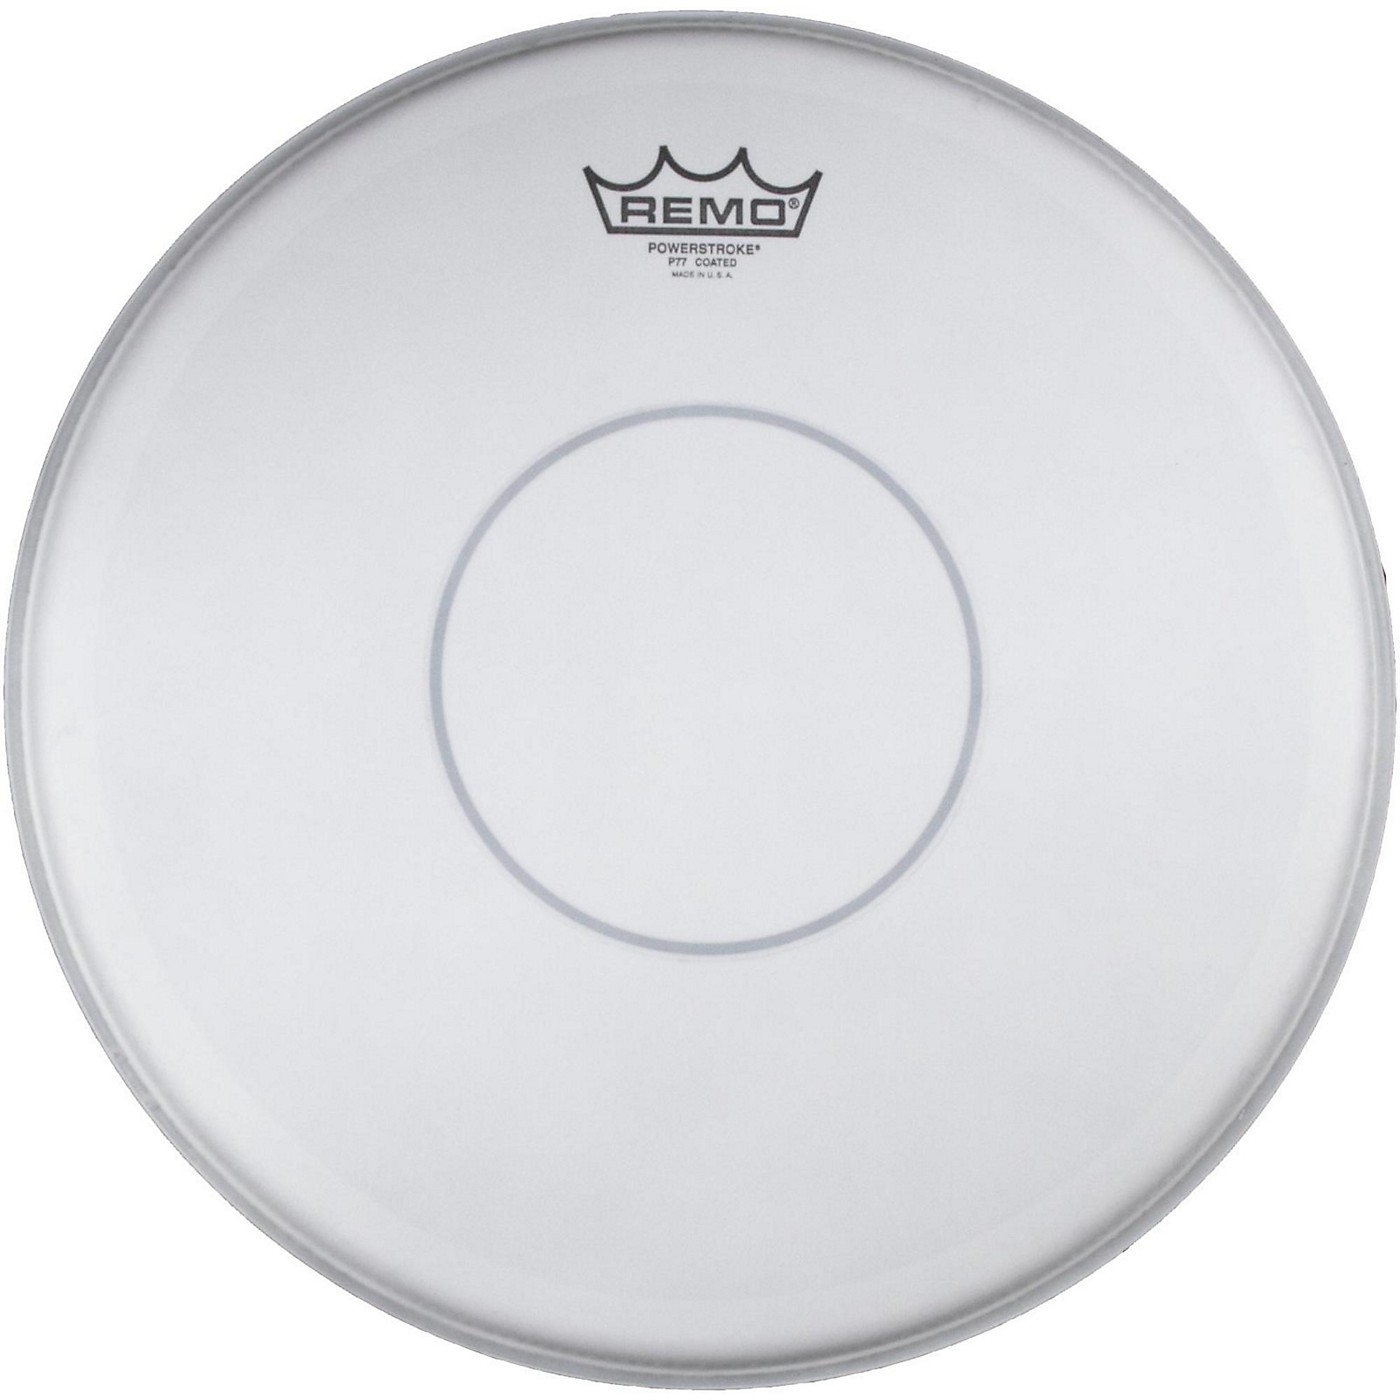 Remo Powerstroke 77 Coated Clear Dot Drumhead thumbnail